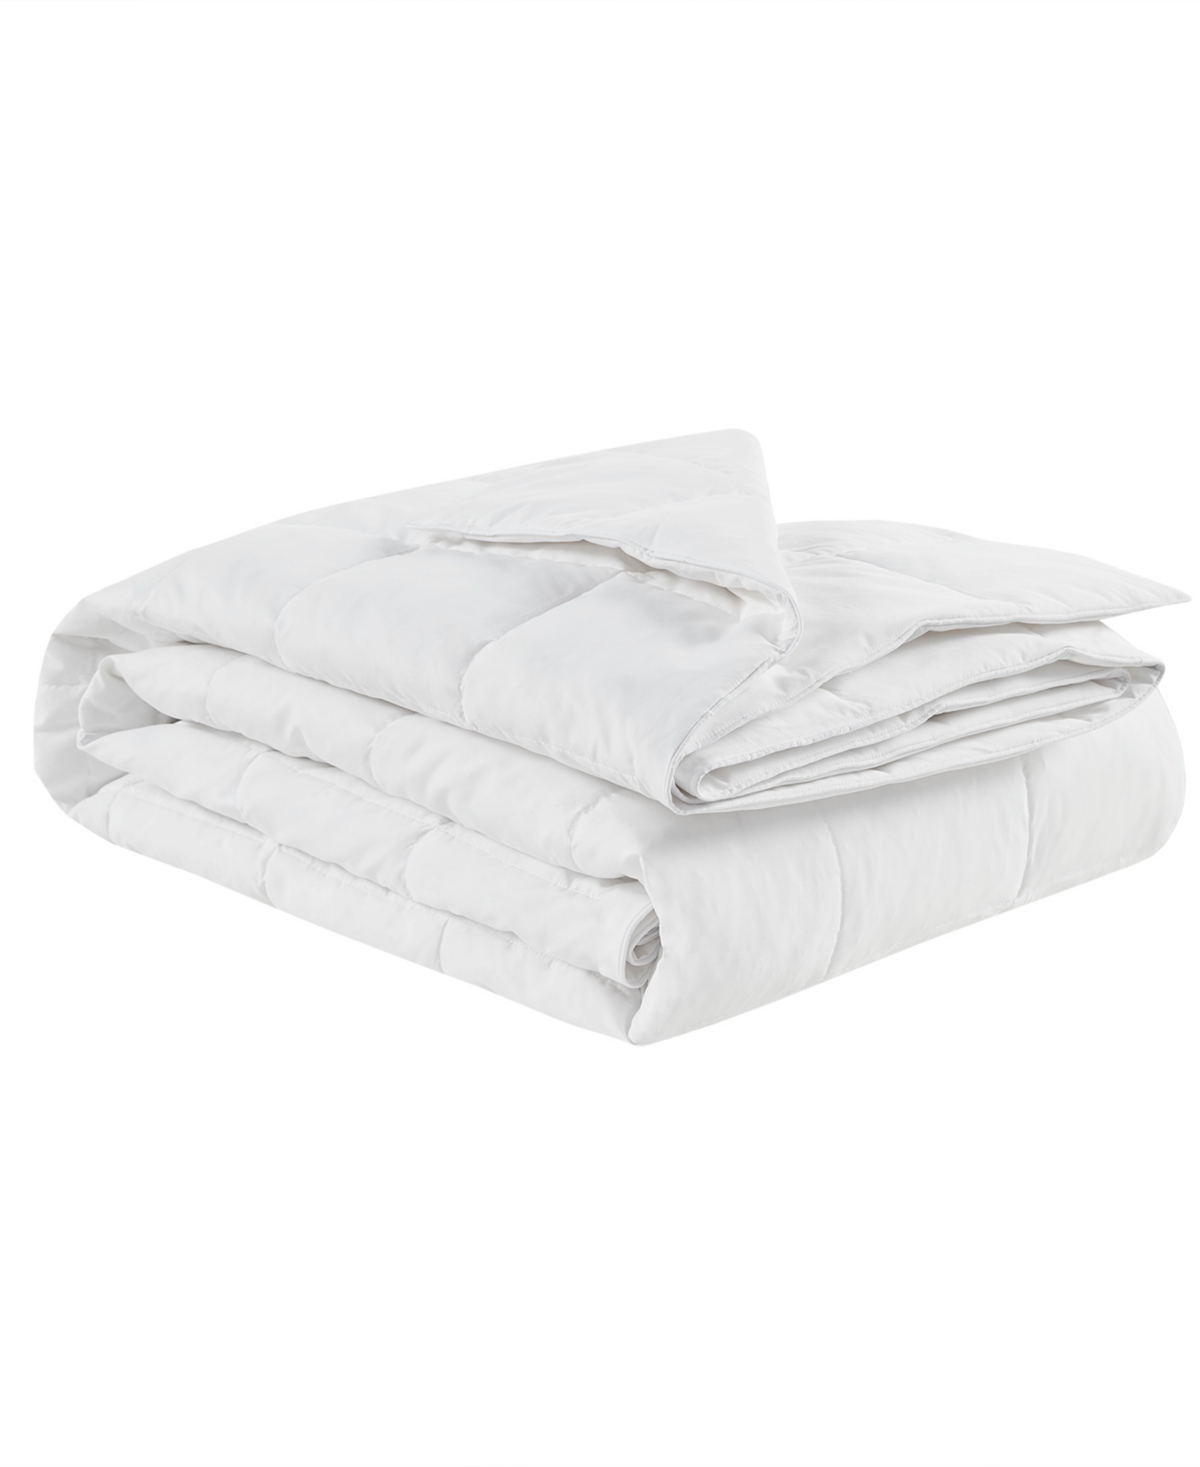 Sleep Philosophy Four Seasons Goose Feather & Good Down Filling Blanket, Twin Bedding In White